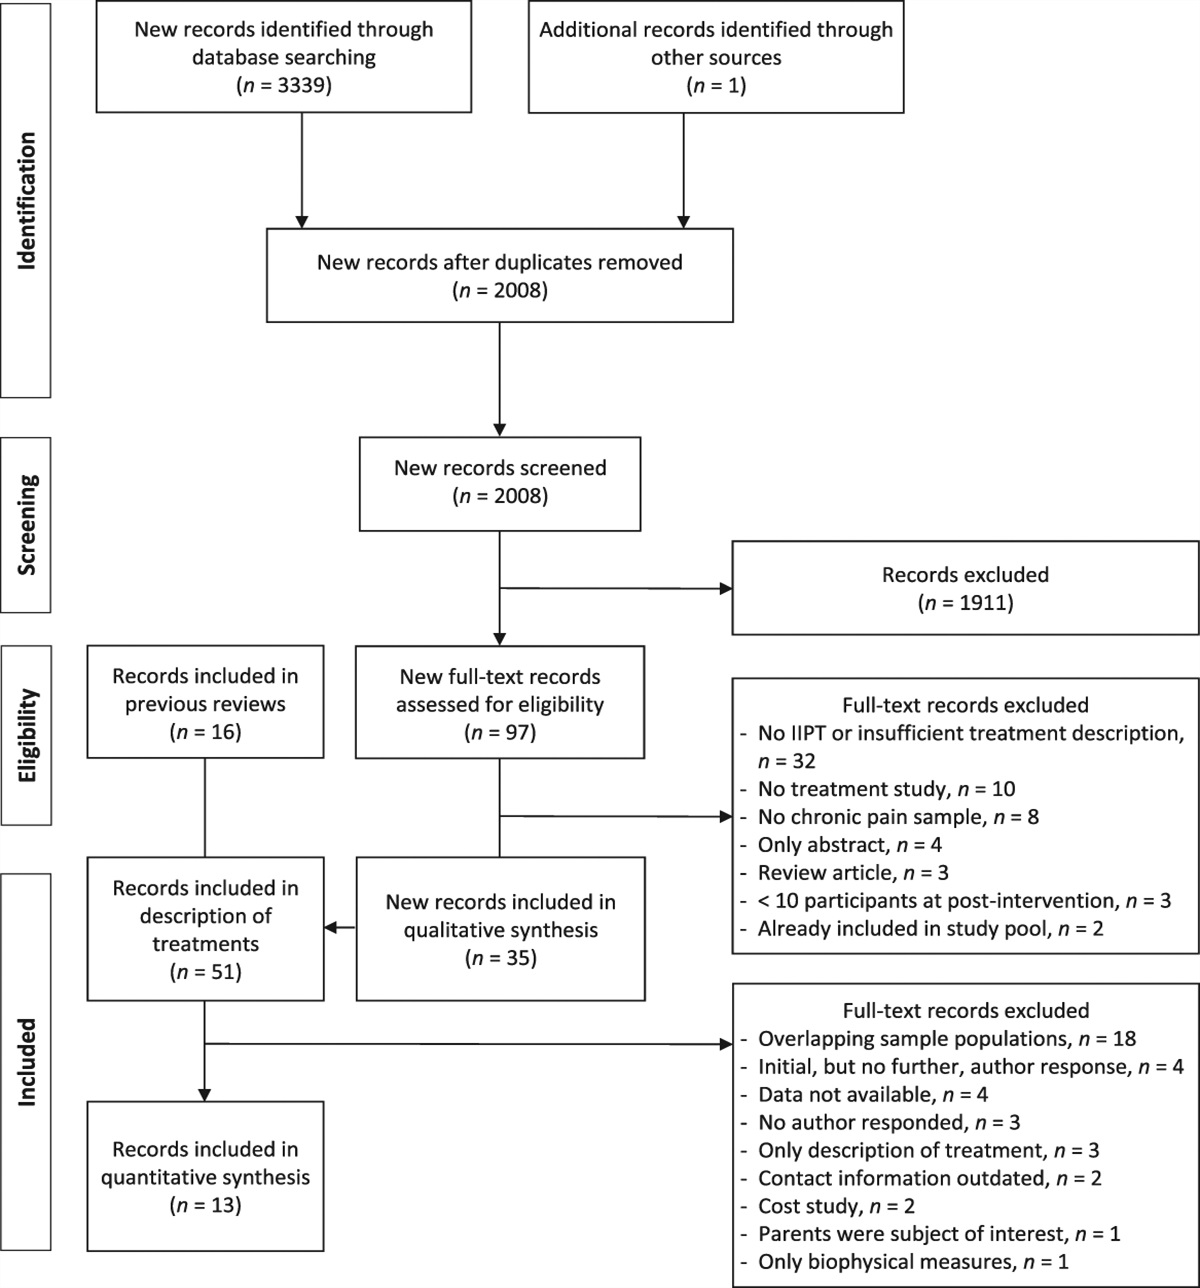 Intensive interdisciplinary pain treatment for children and adolescents with chronic noncancer pain: a preregistered systematic review and individual patient data meta-analysis